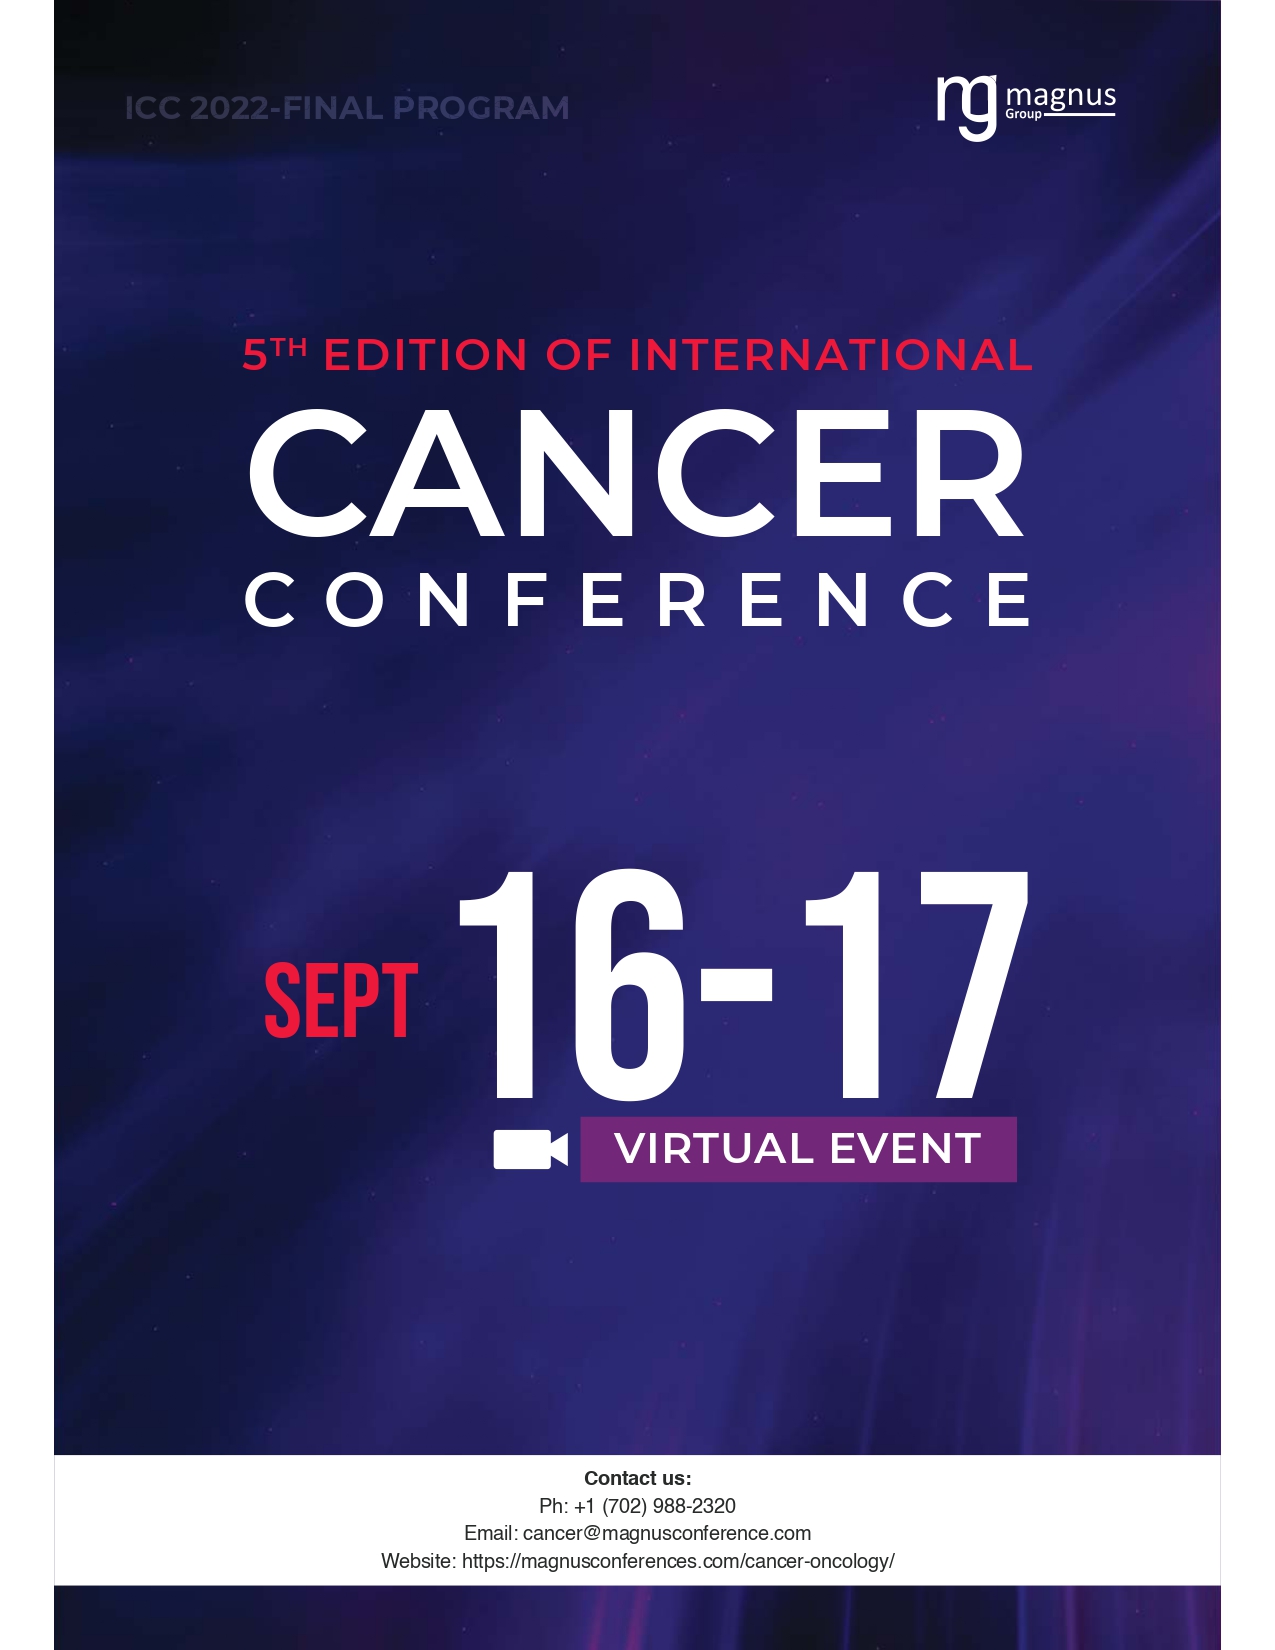 5th Edition of International Cancer Conference | Singapore Program